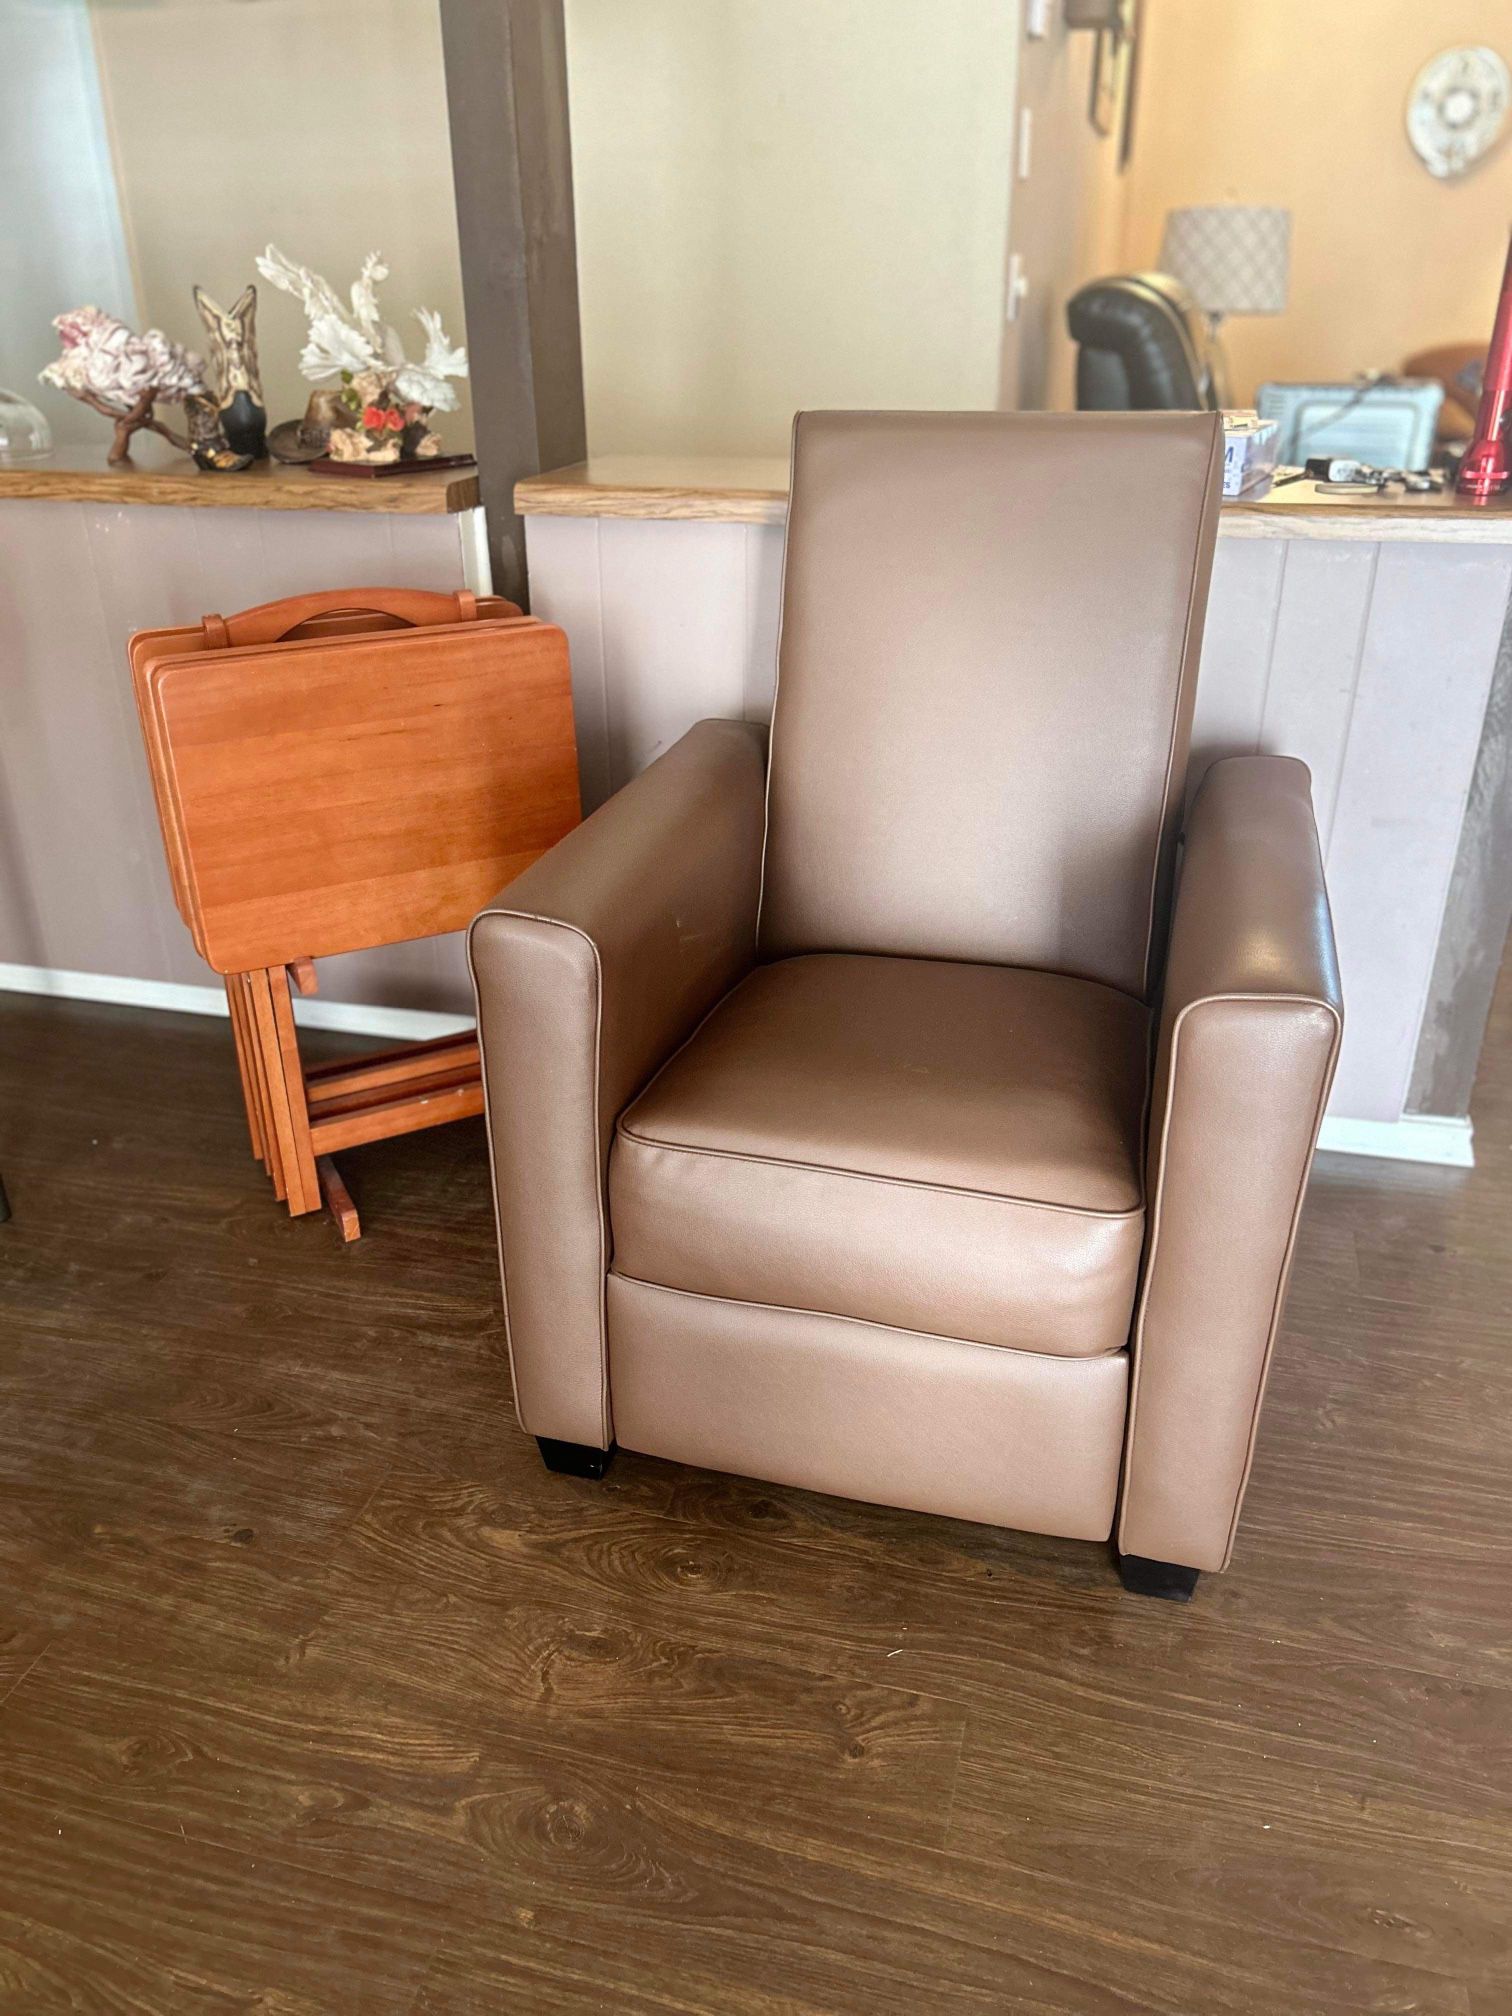 Small Recliner Sells New At Rooms To Go For $369